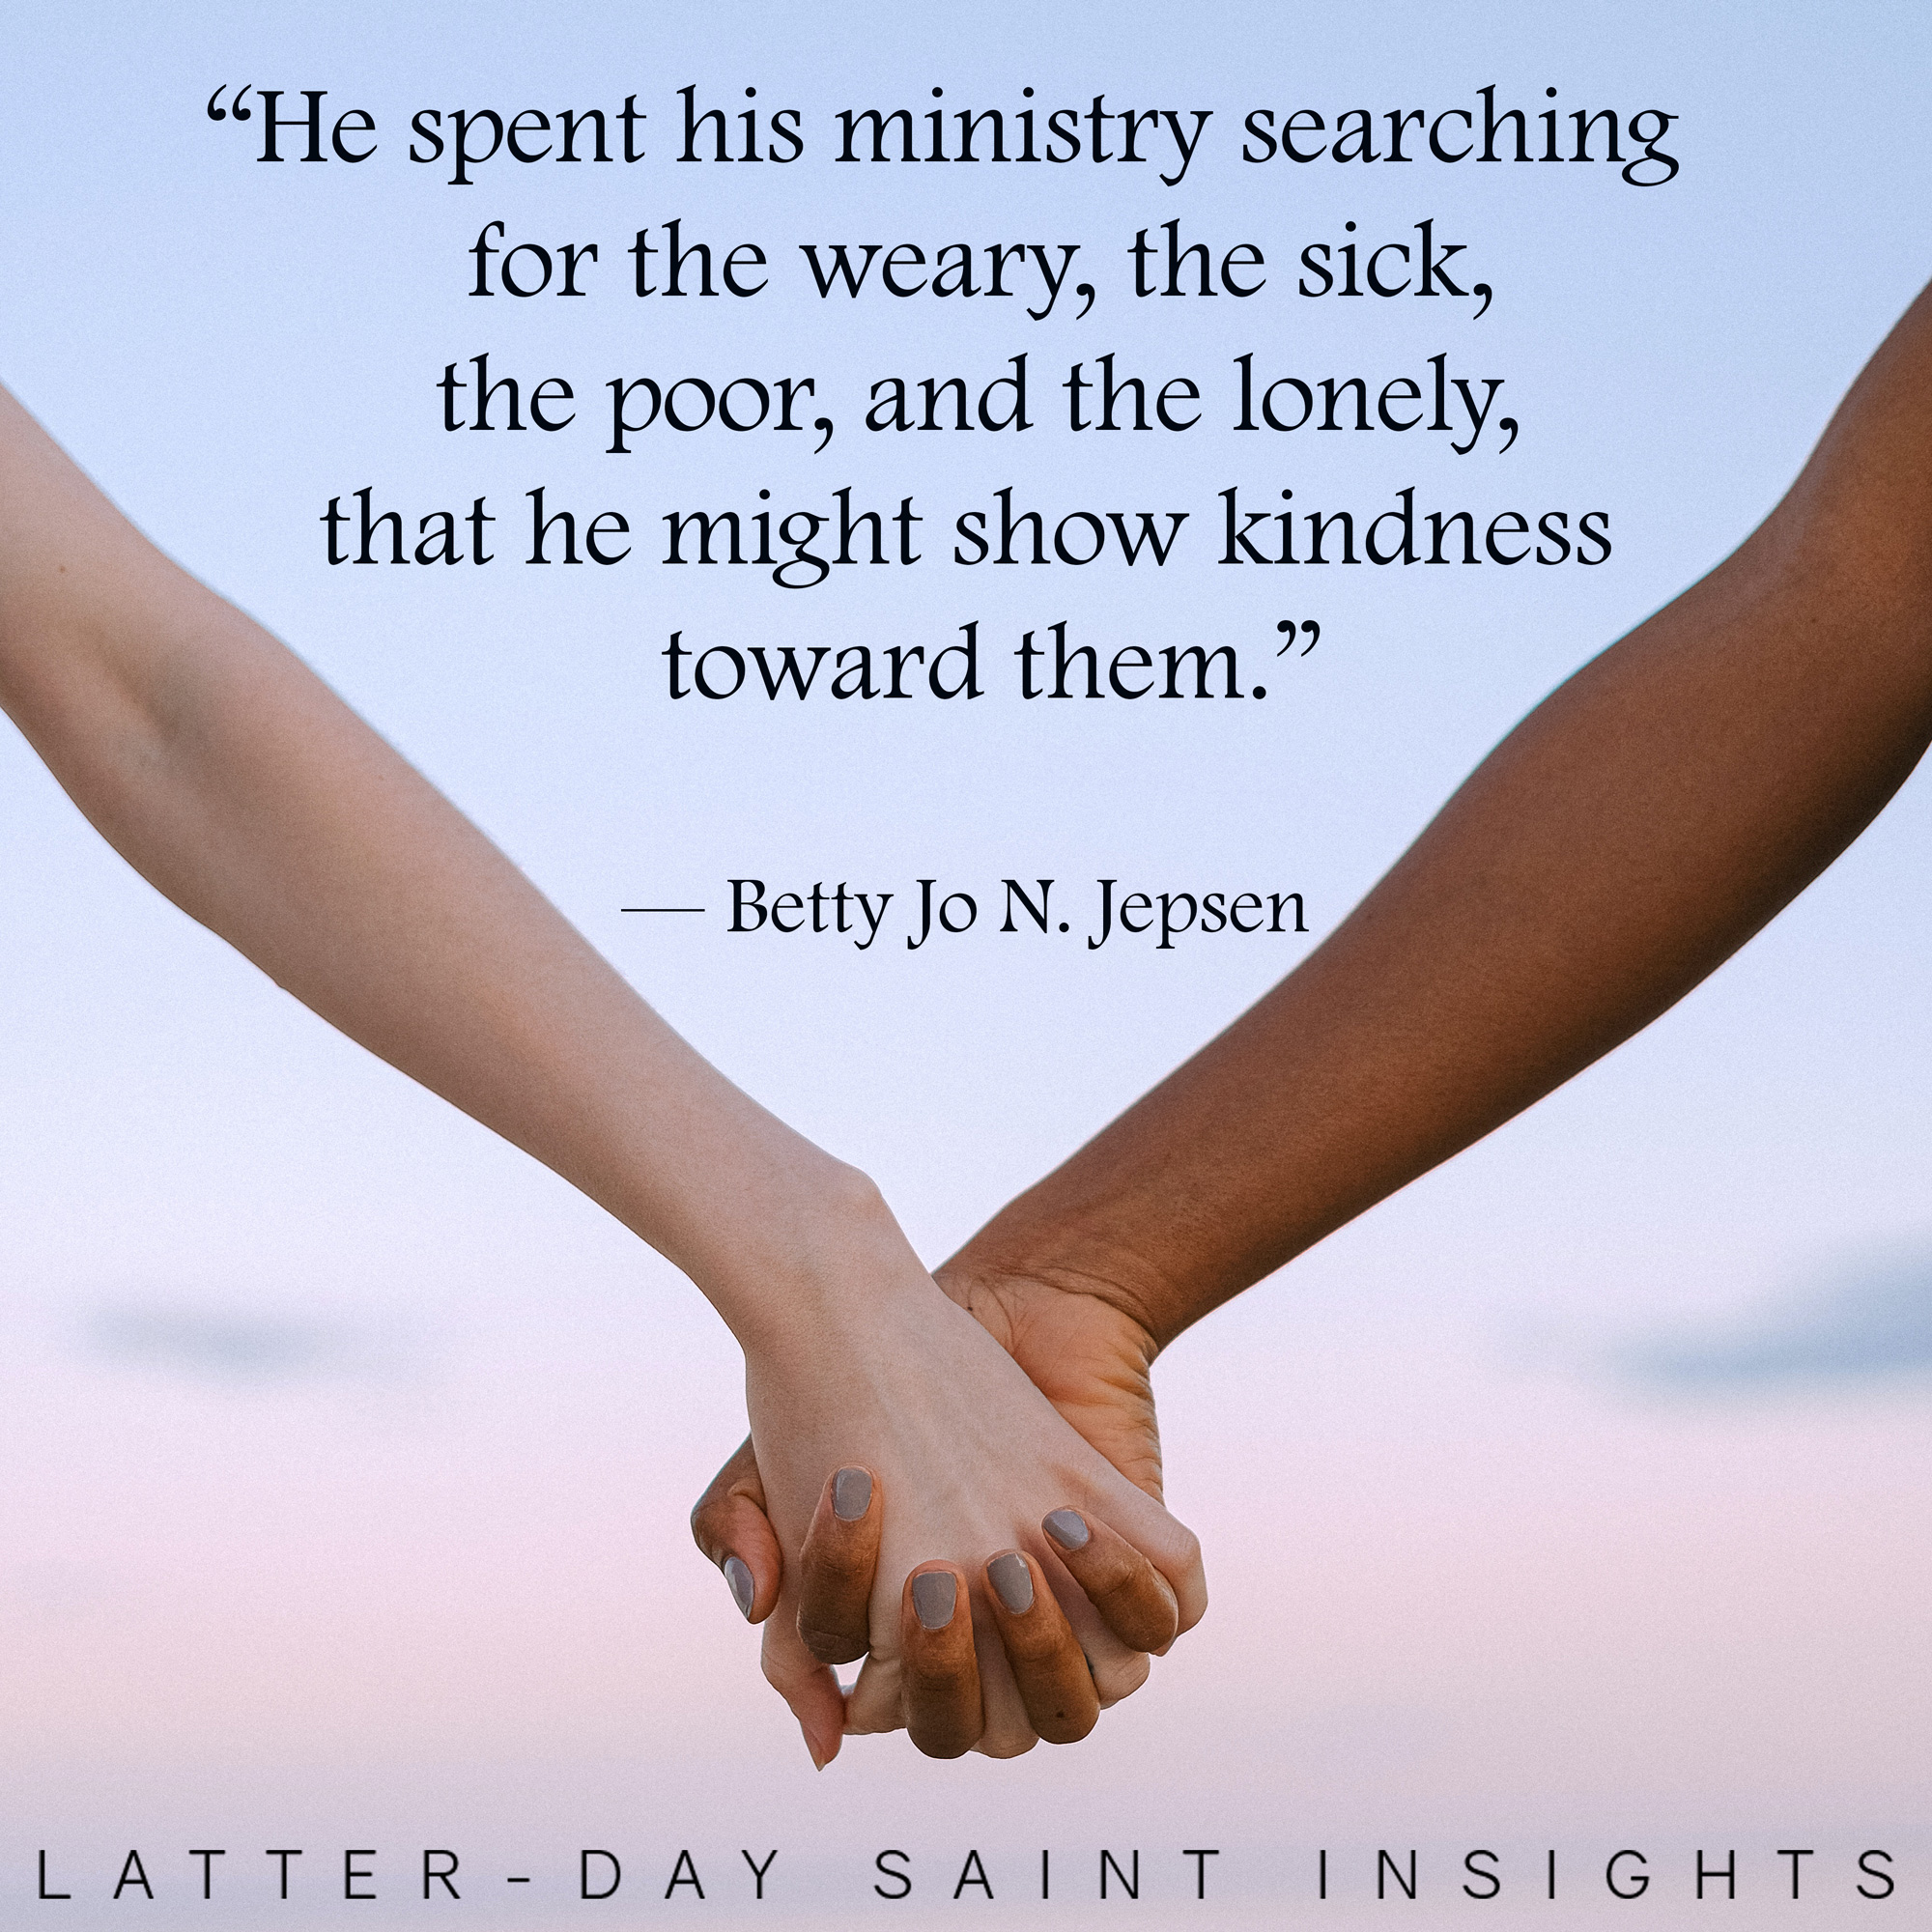 Jesus spent his ministry searching for the weary, the sick, the poor, and the lonely, that he might show kindness toward them -Betty Jo N. Jepsen